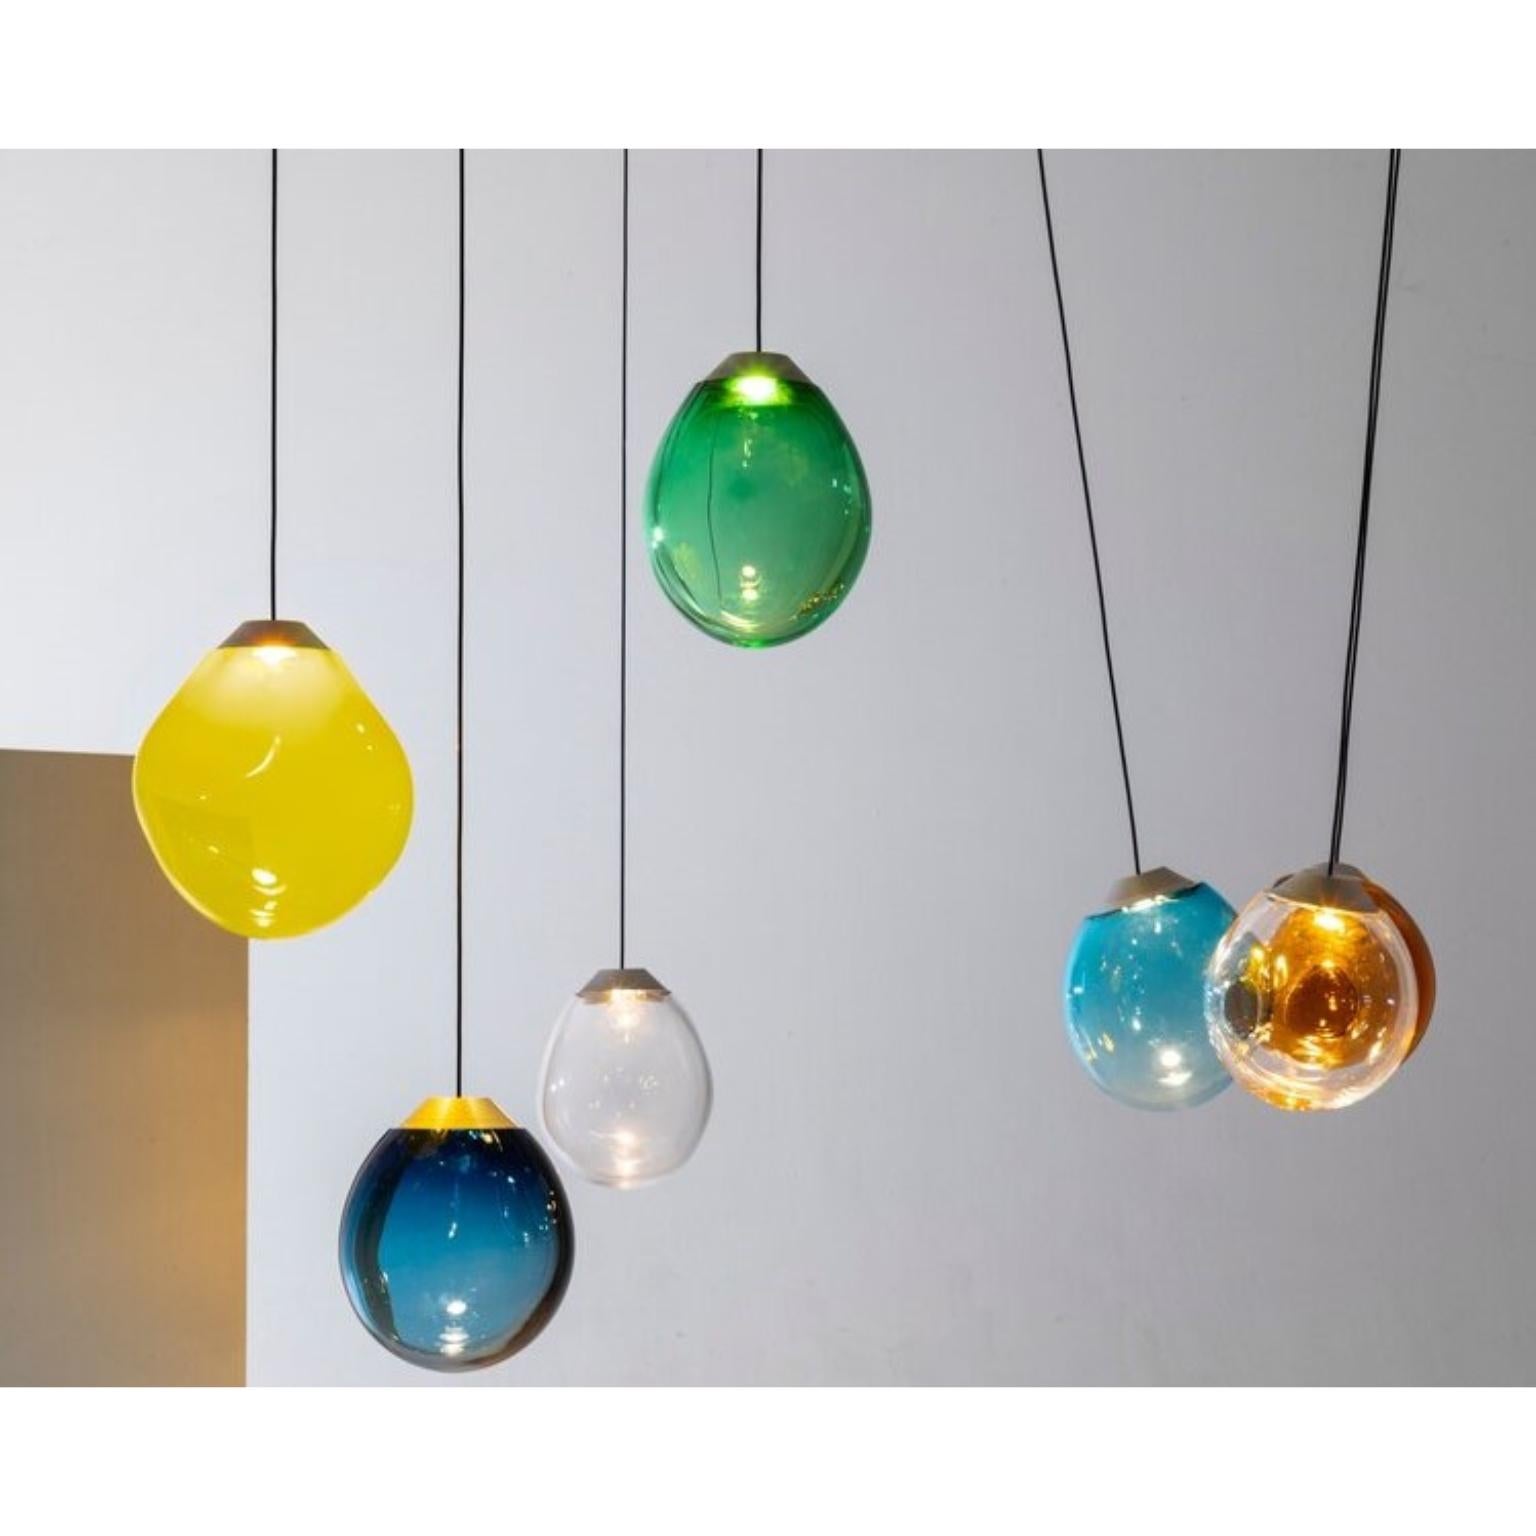 Colored triple momentum blown glass pendants by Alex de Witte
Dimensions: 50 -70 cm
Materials: Mouth blown glass

With the Momentum Alex de Witte has found the prefect artistic defining moment while playing with the boundaries of glass blowing in